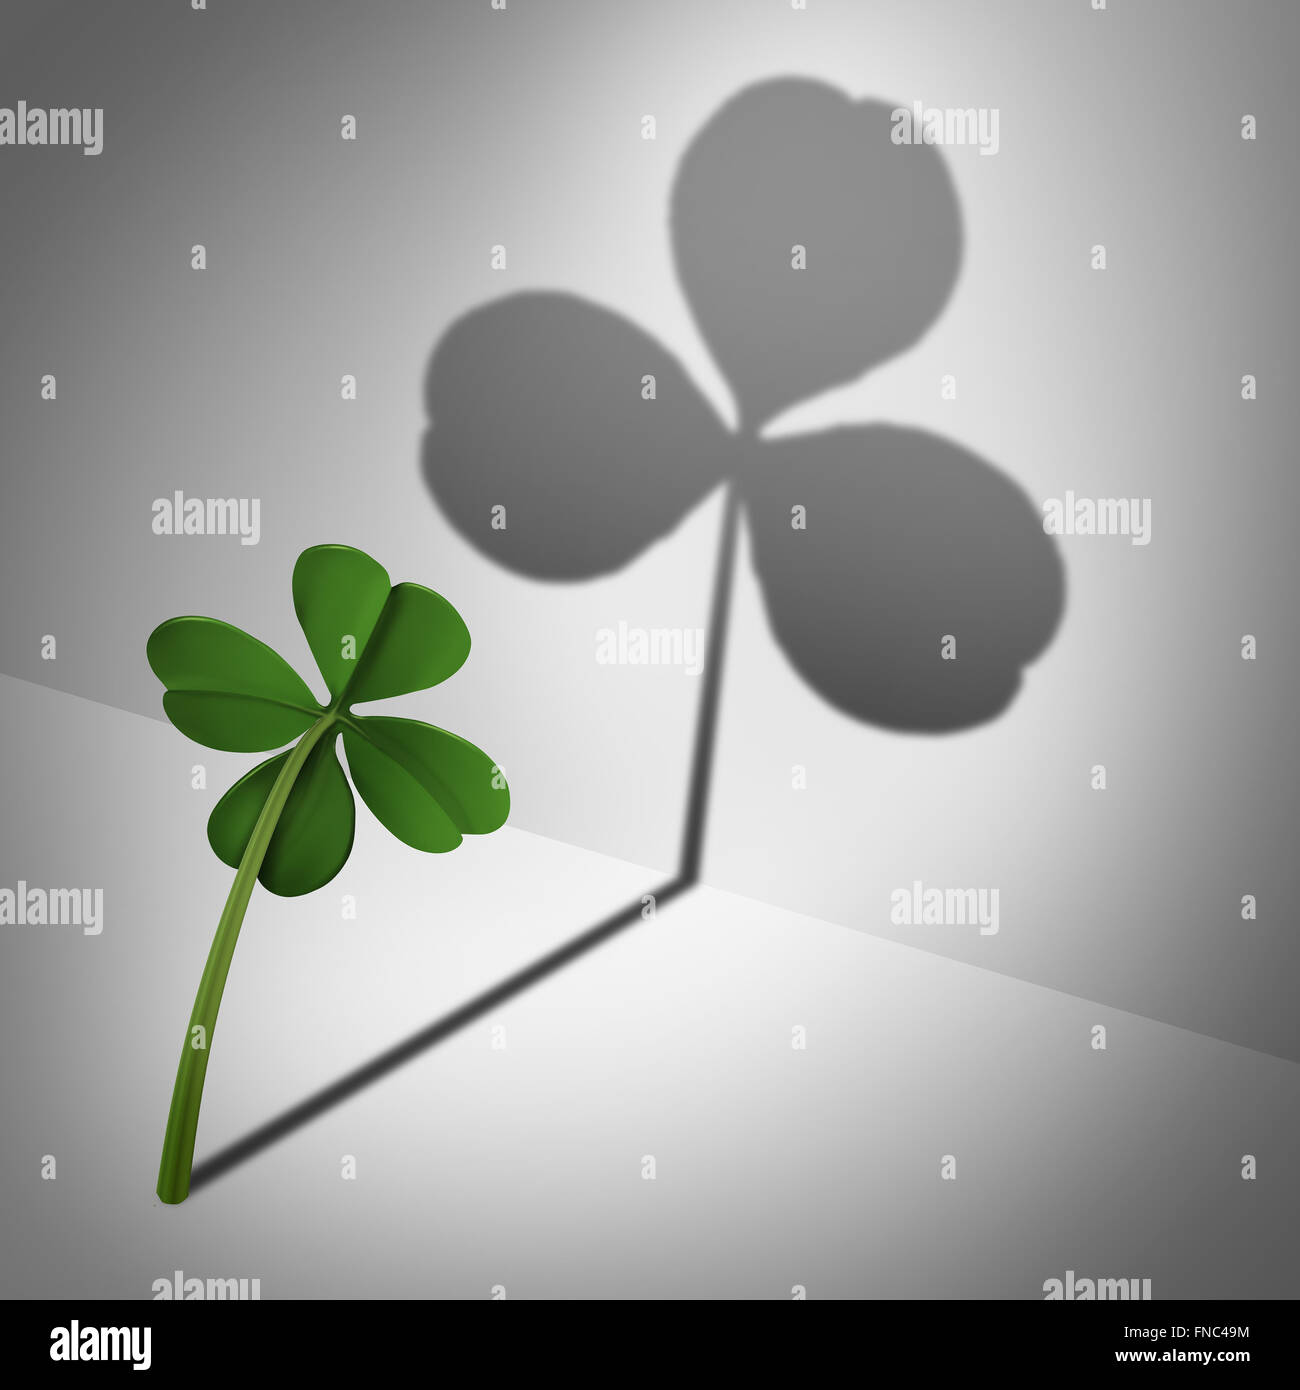 Low self esteem psychological concept as a four leaf clover casting a shadow with only three leaves as a mental health condition of feeling inadequate or negative thinking and low self confidence. Stock Photo